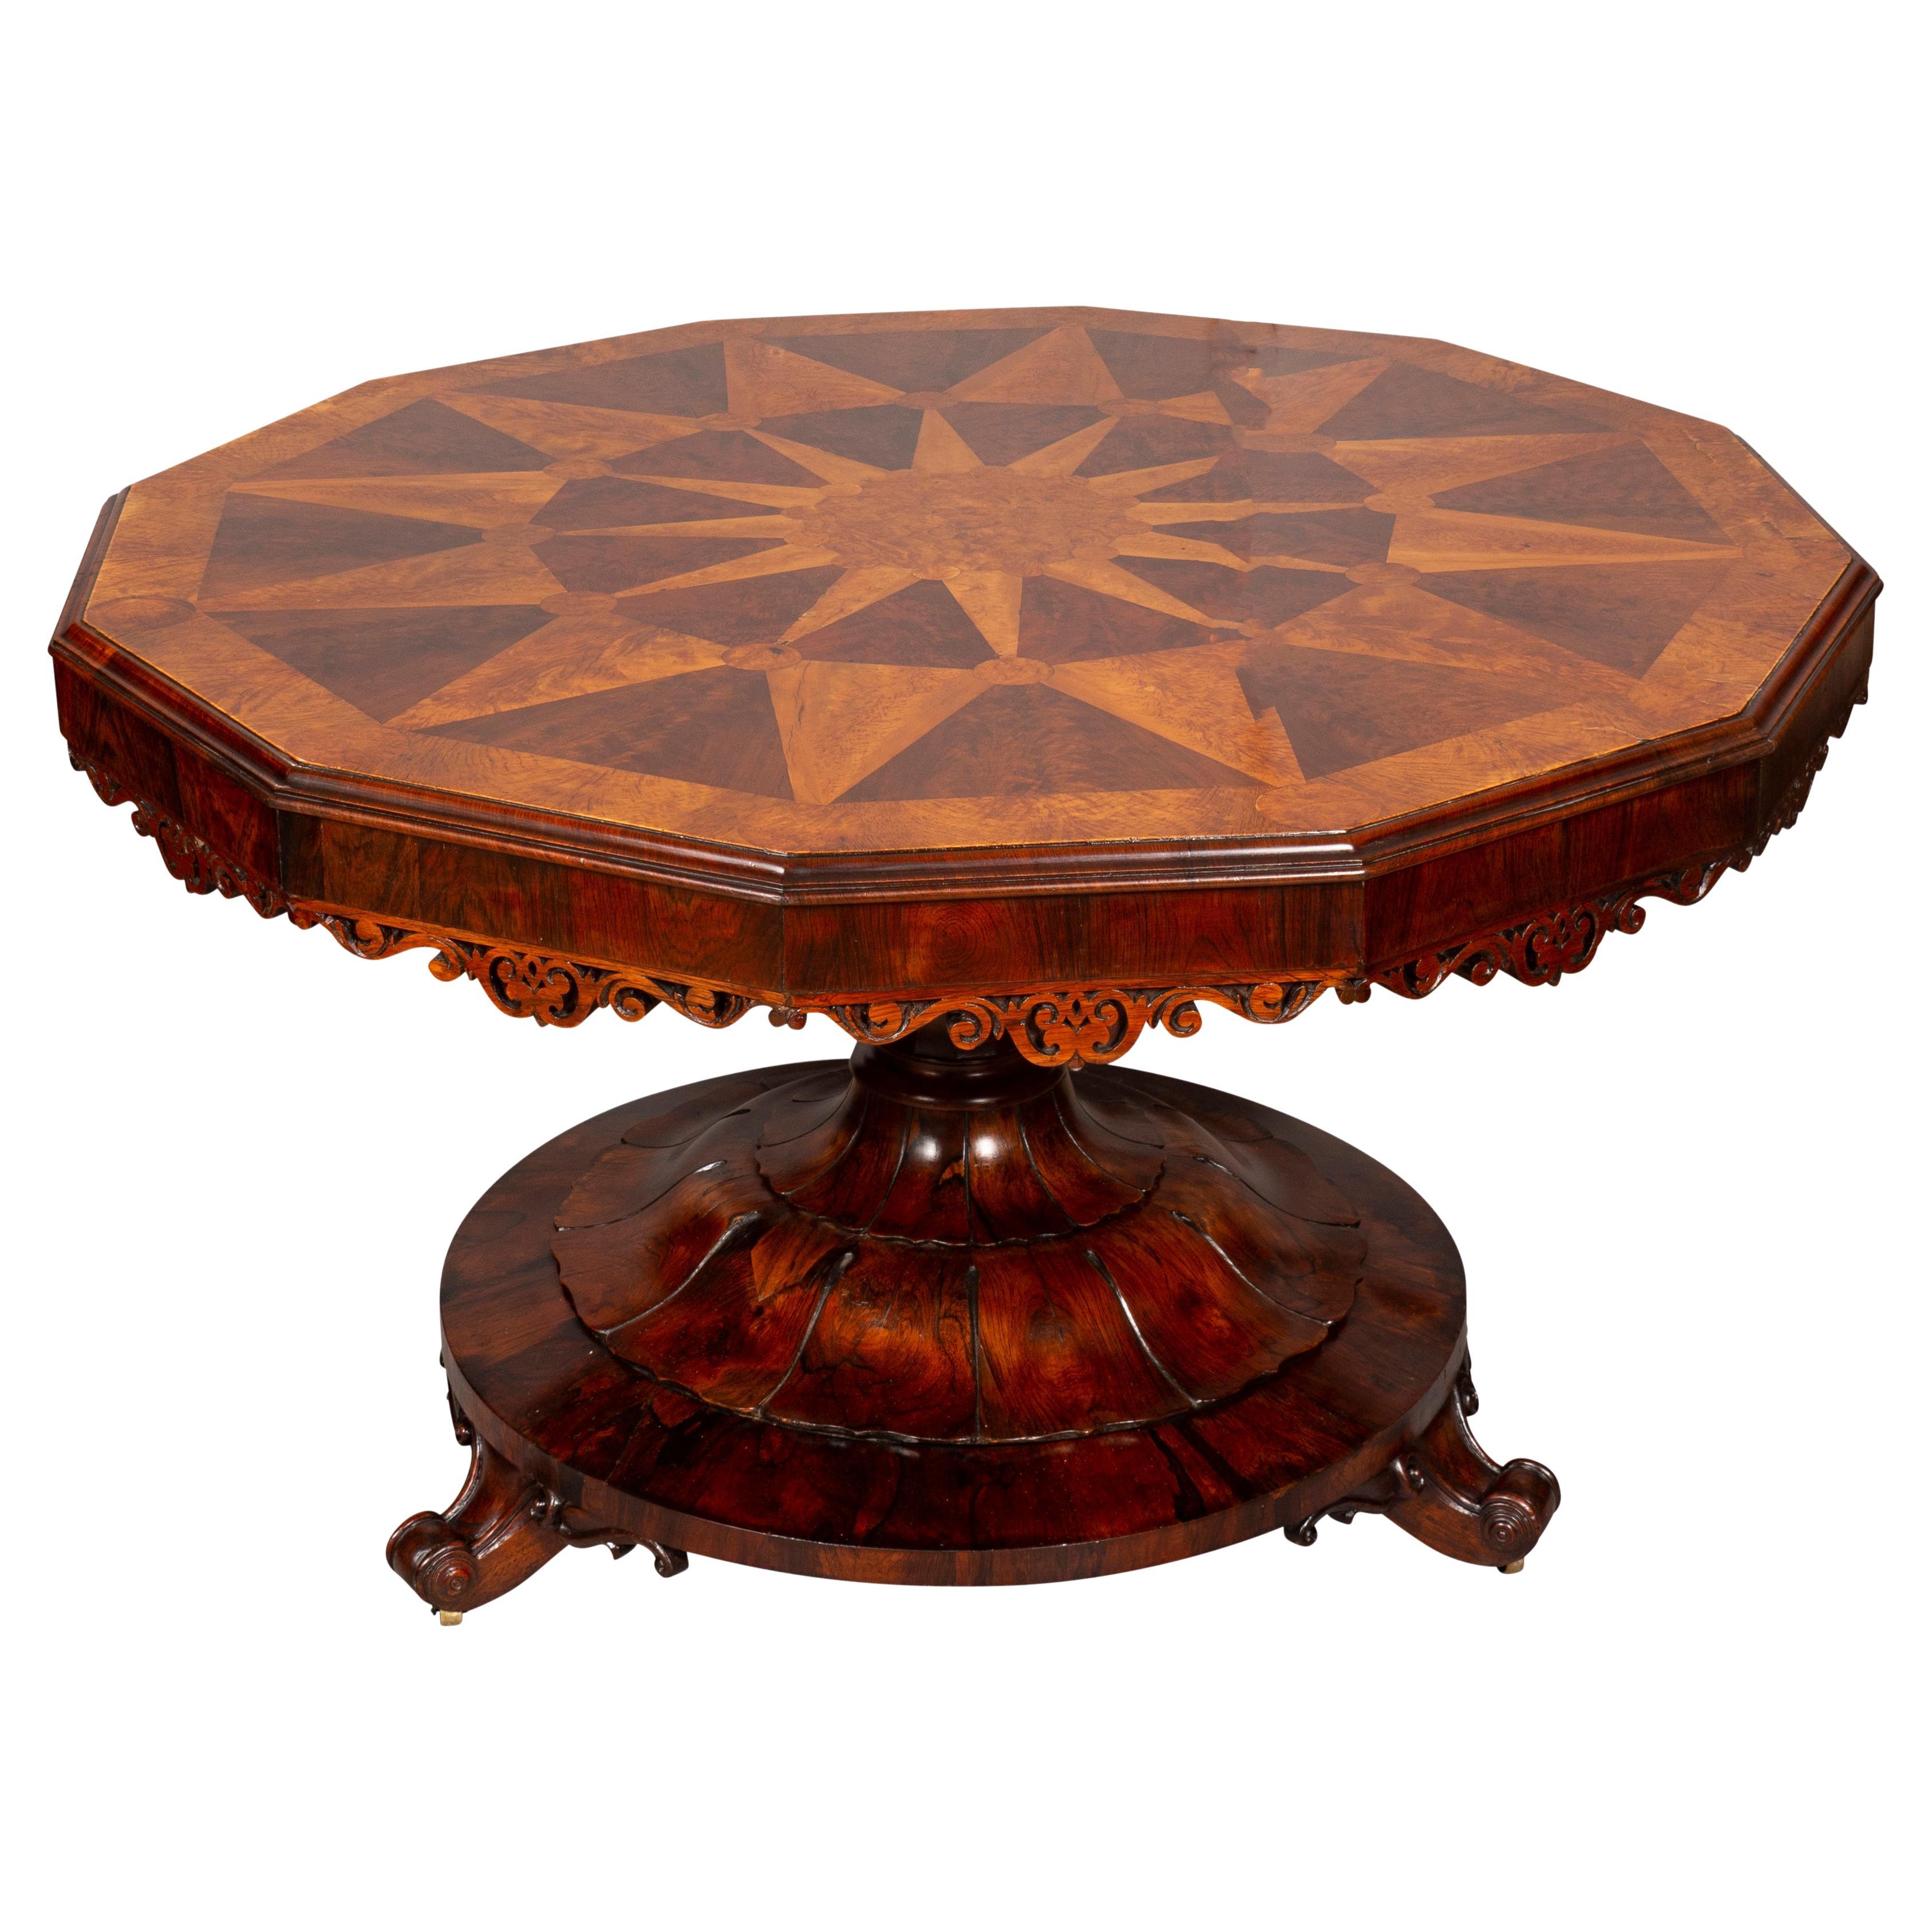 Twelve sided dodecagon hinged top with elaborate sunburst central inlay with outer band sunburst with elm outer banding, conforming apron with carved details, on a inverted vase support and circular plinth base, carved. 
French feet.